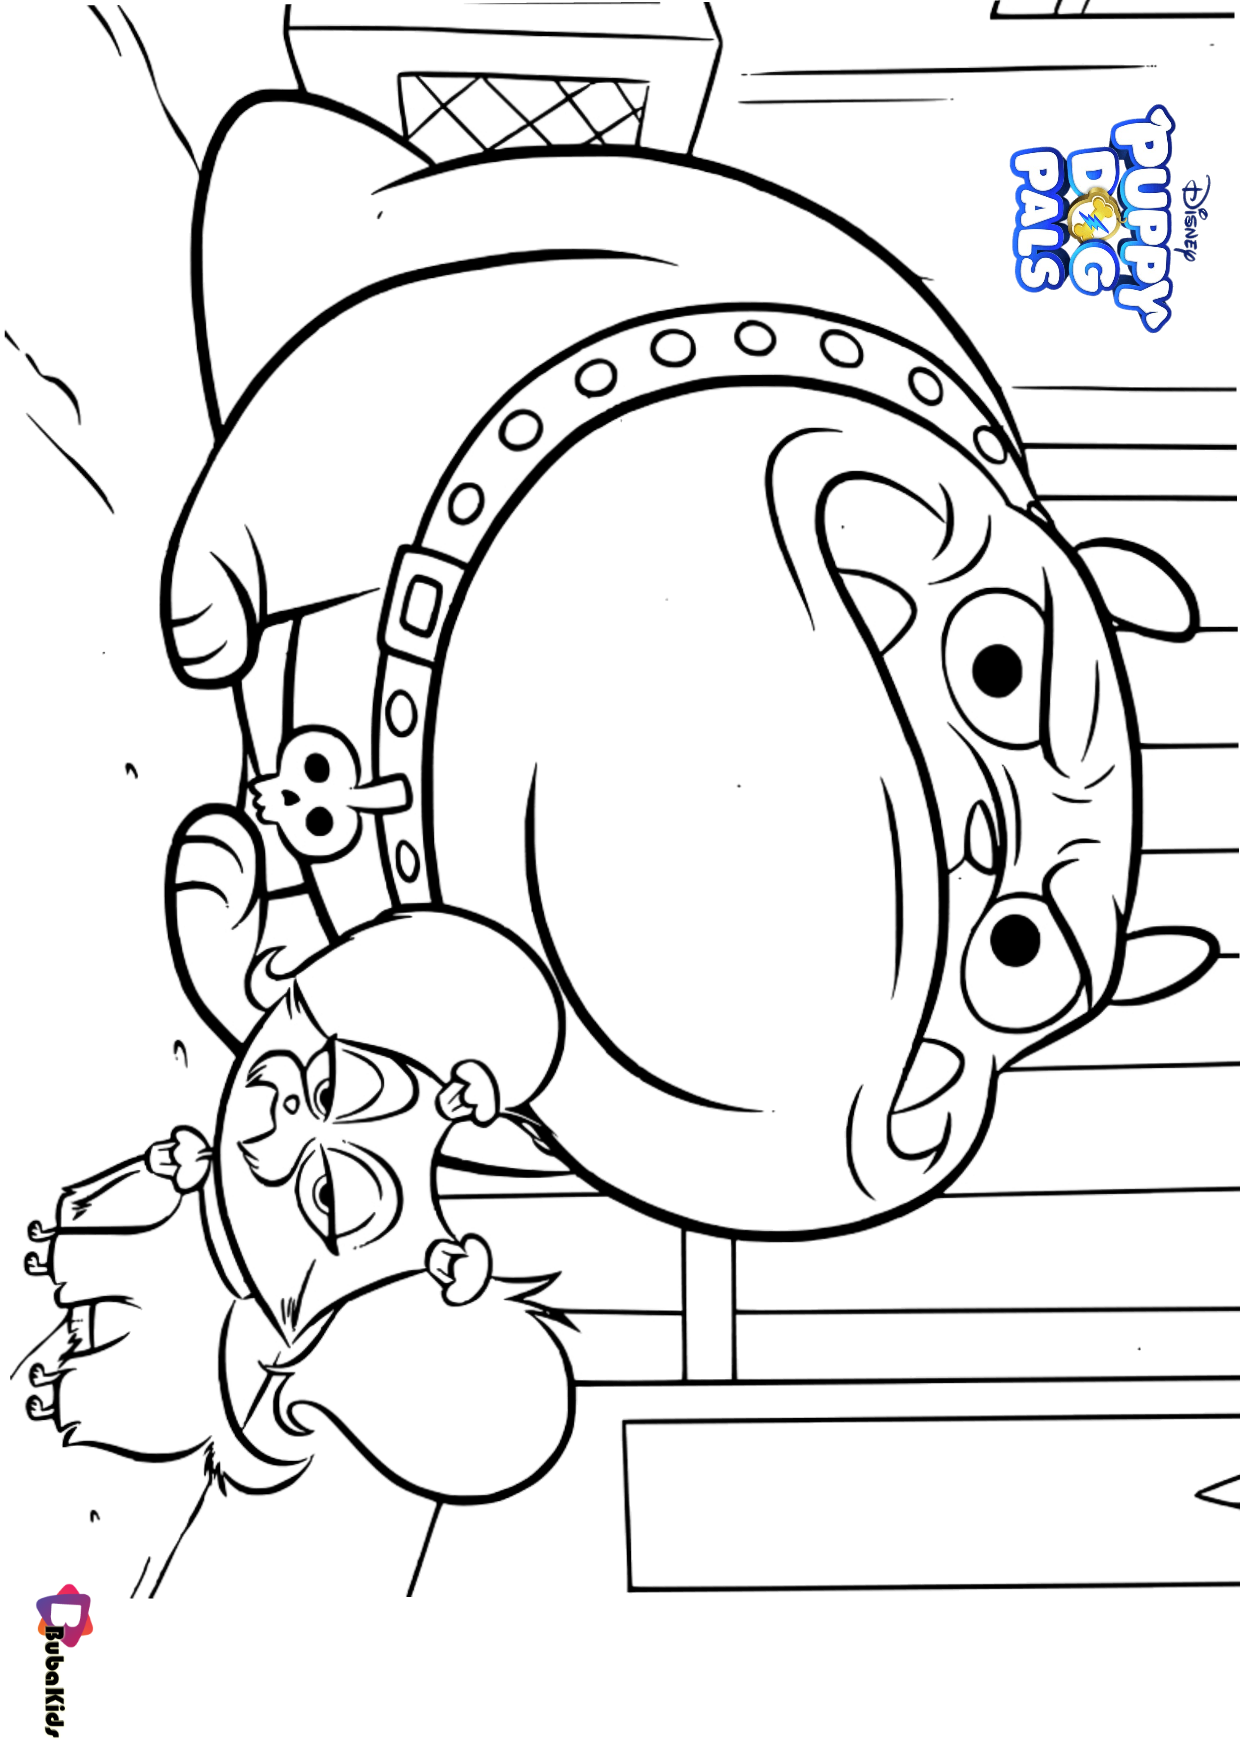 Rufus and Cupcake Puppy Dog Pals coloring page